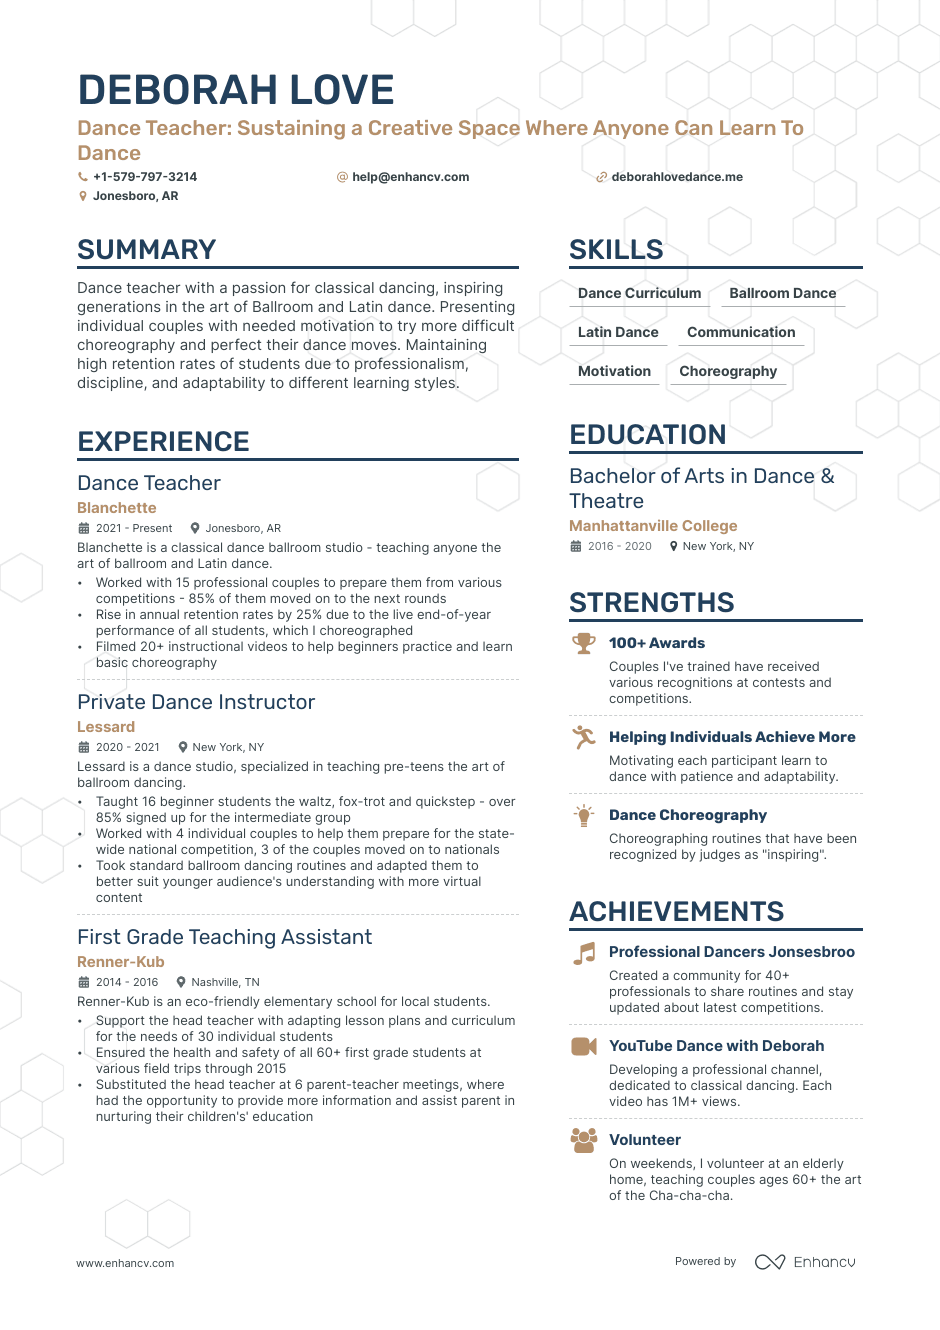 Dance Teacher: Sustaining a Creative Space Where Anyone Can Learn To Dance resume example